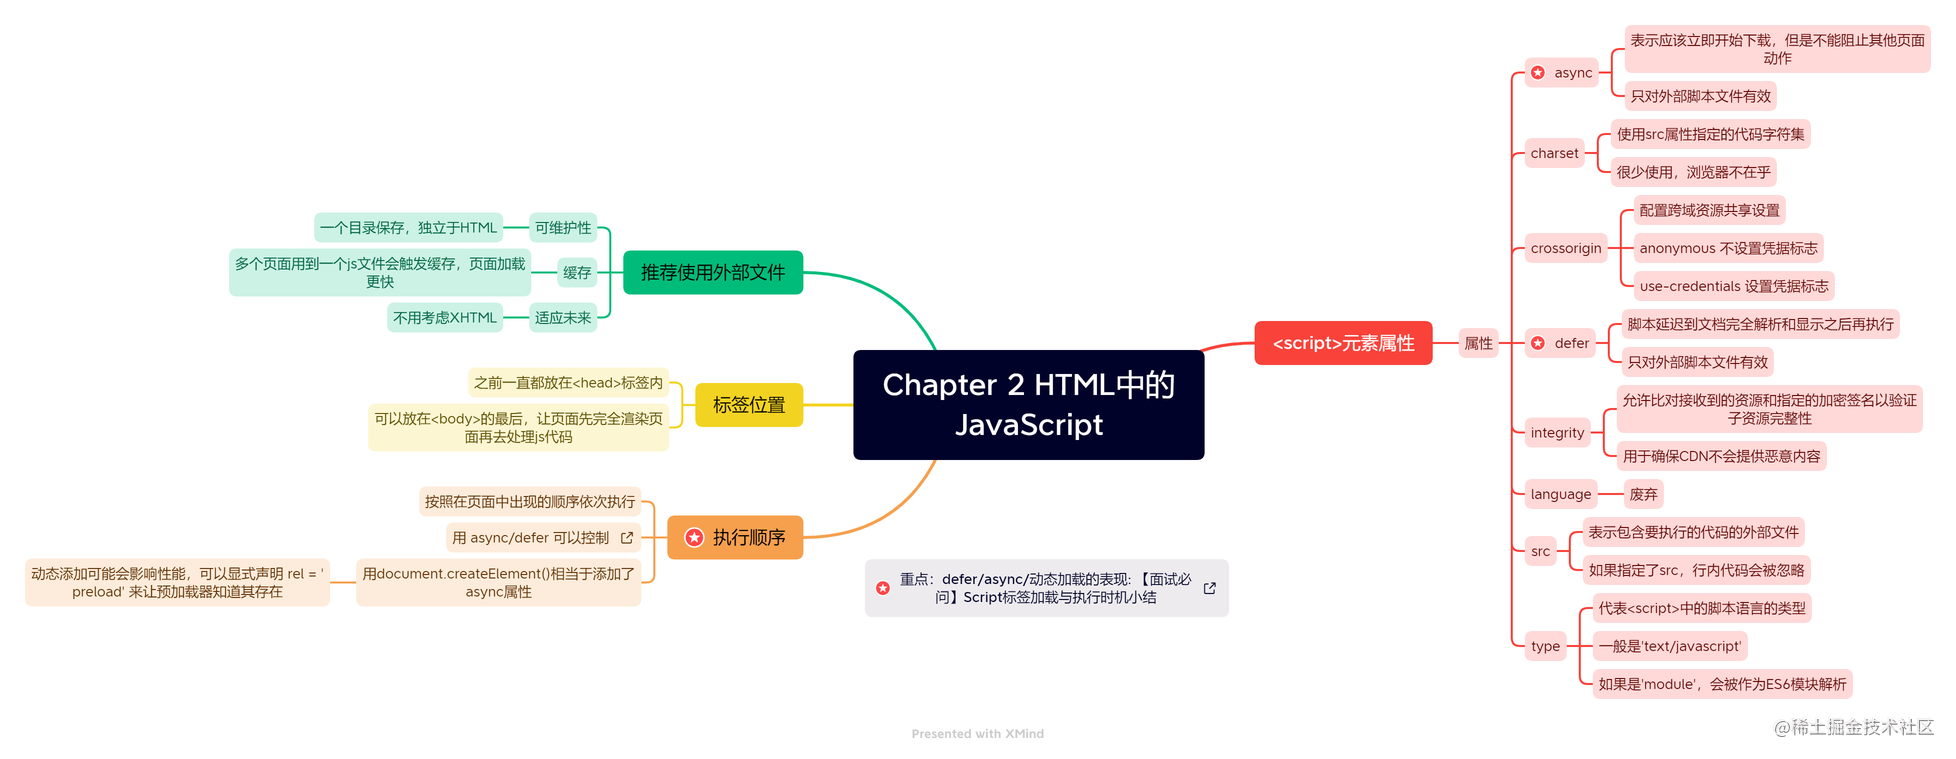 Chapter 2 HTML中的JavaScript.png